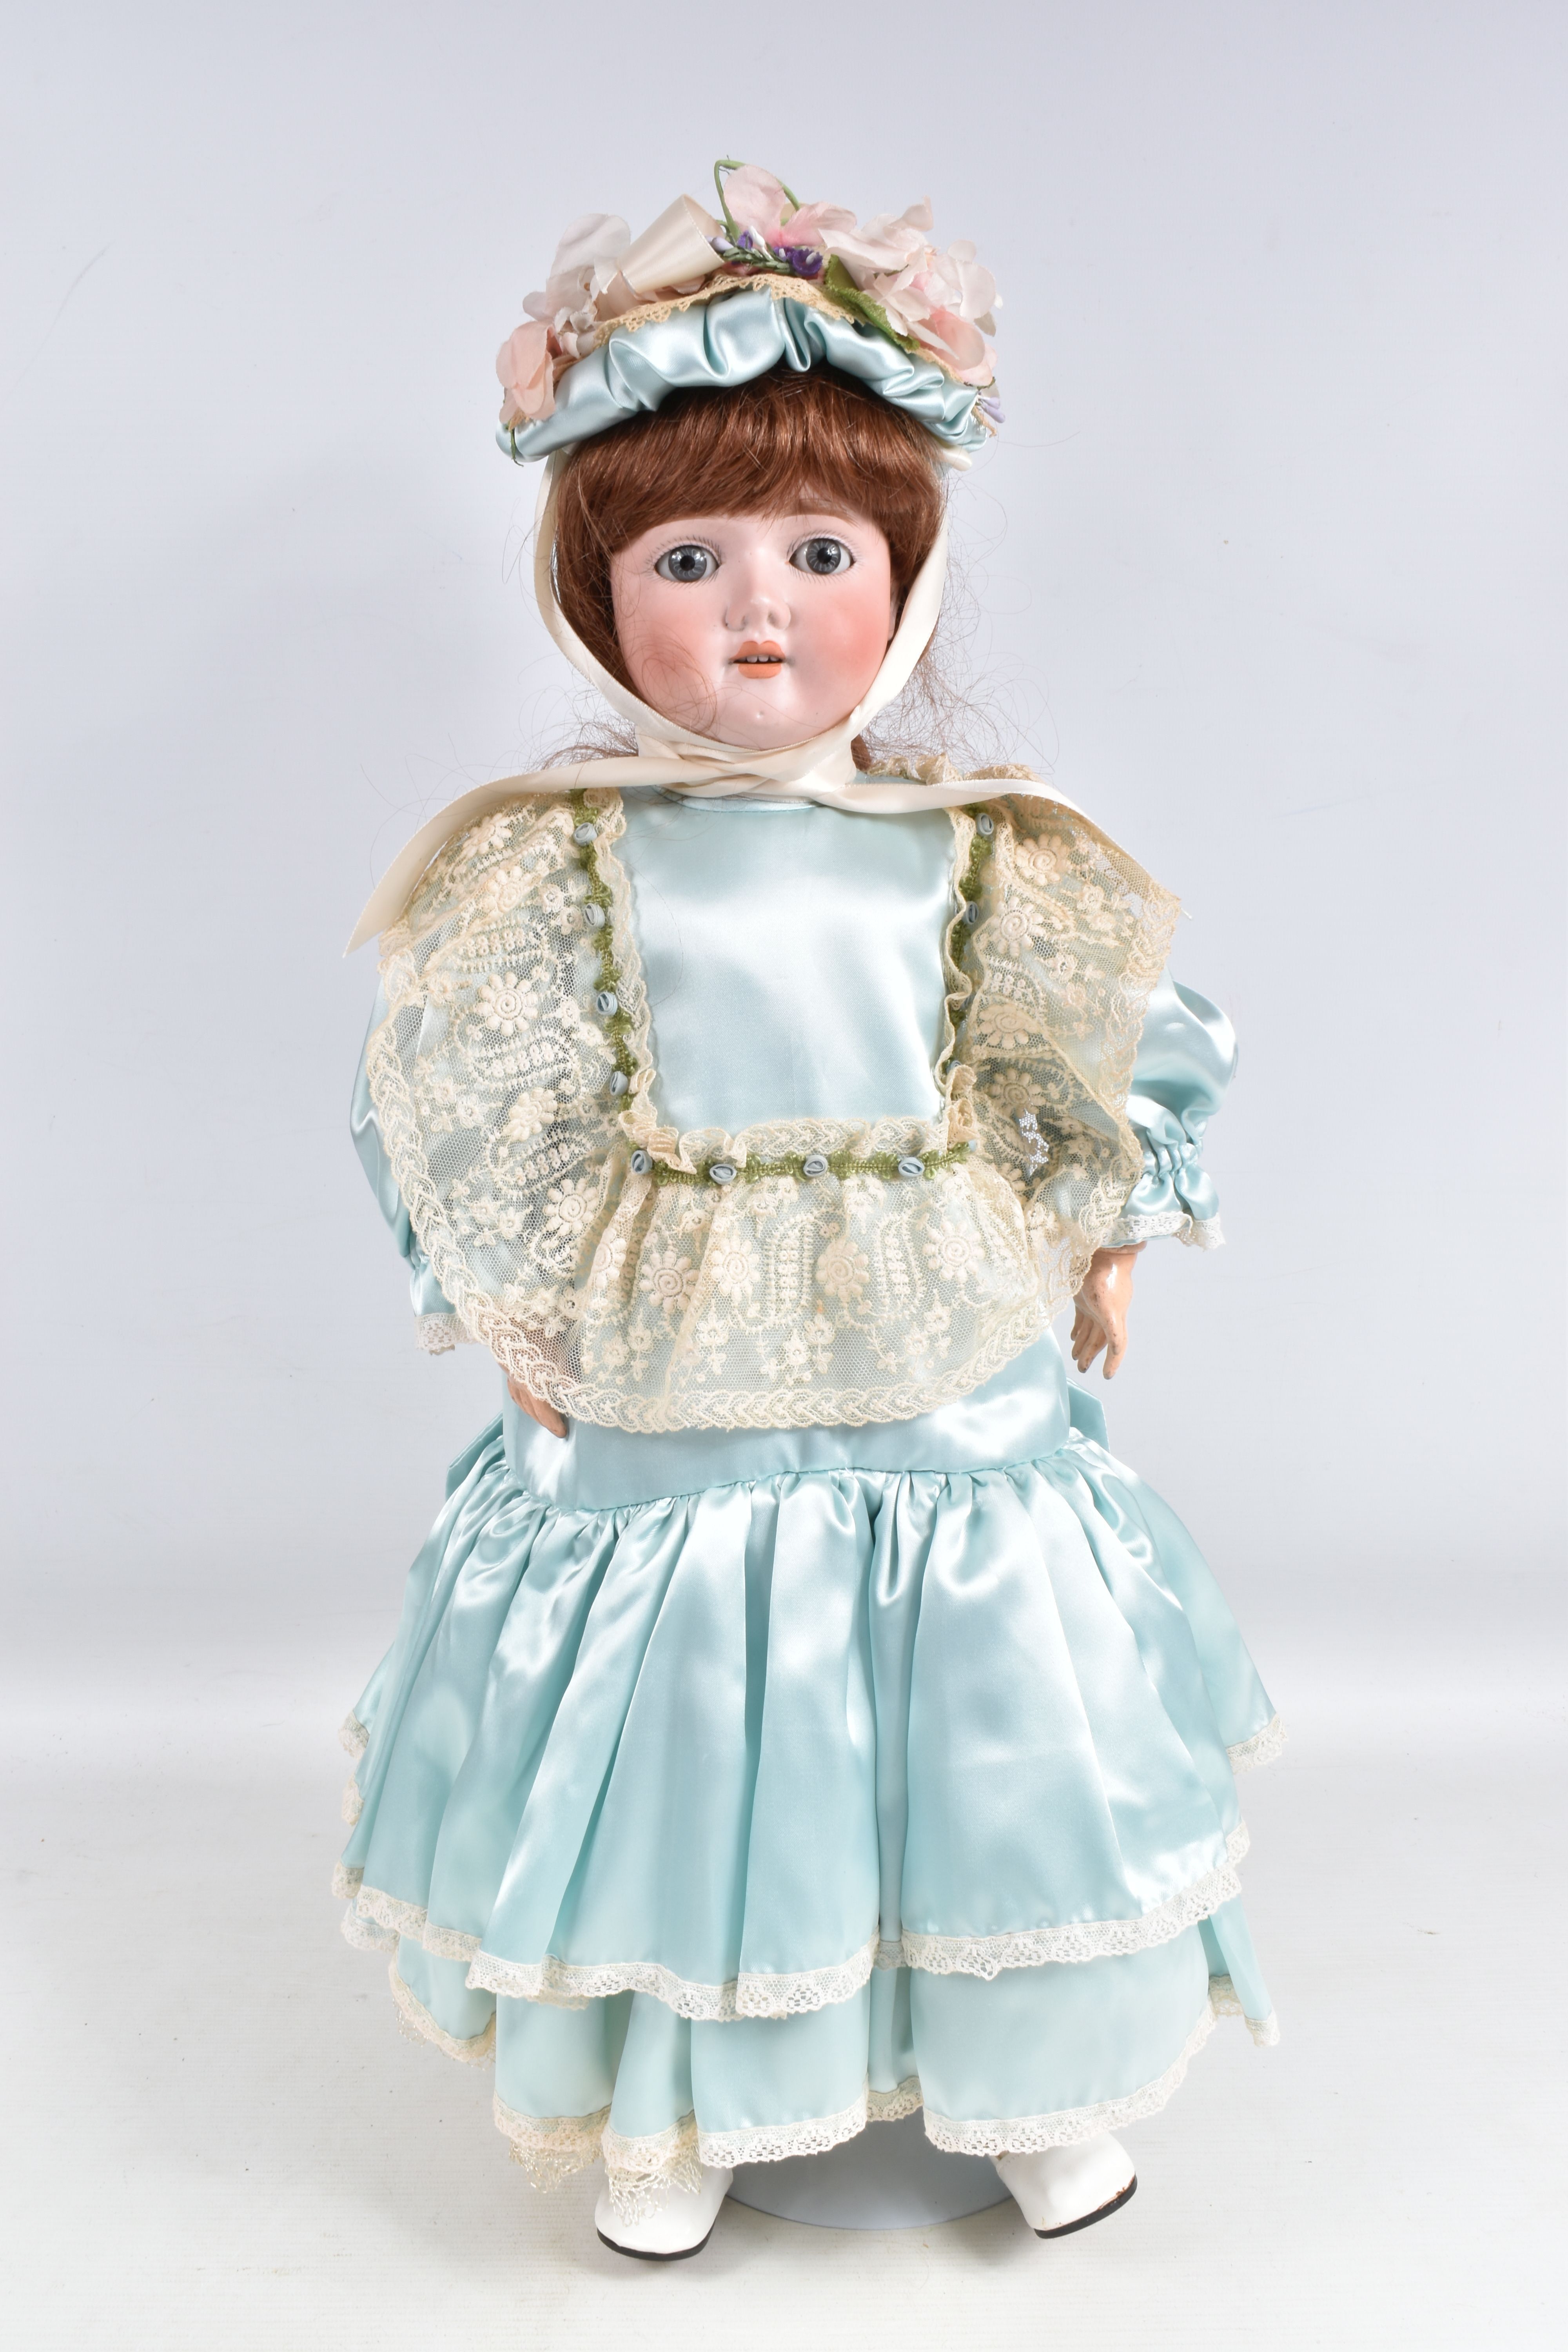 A MAX HANDWERCK BISQUE HEAD DOLL, nape of neck marked 'Max Handwerck Germany 7½', sleeping blue - Image 9 of 12